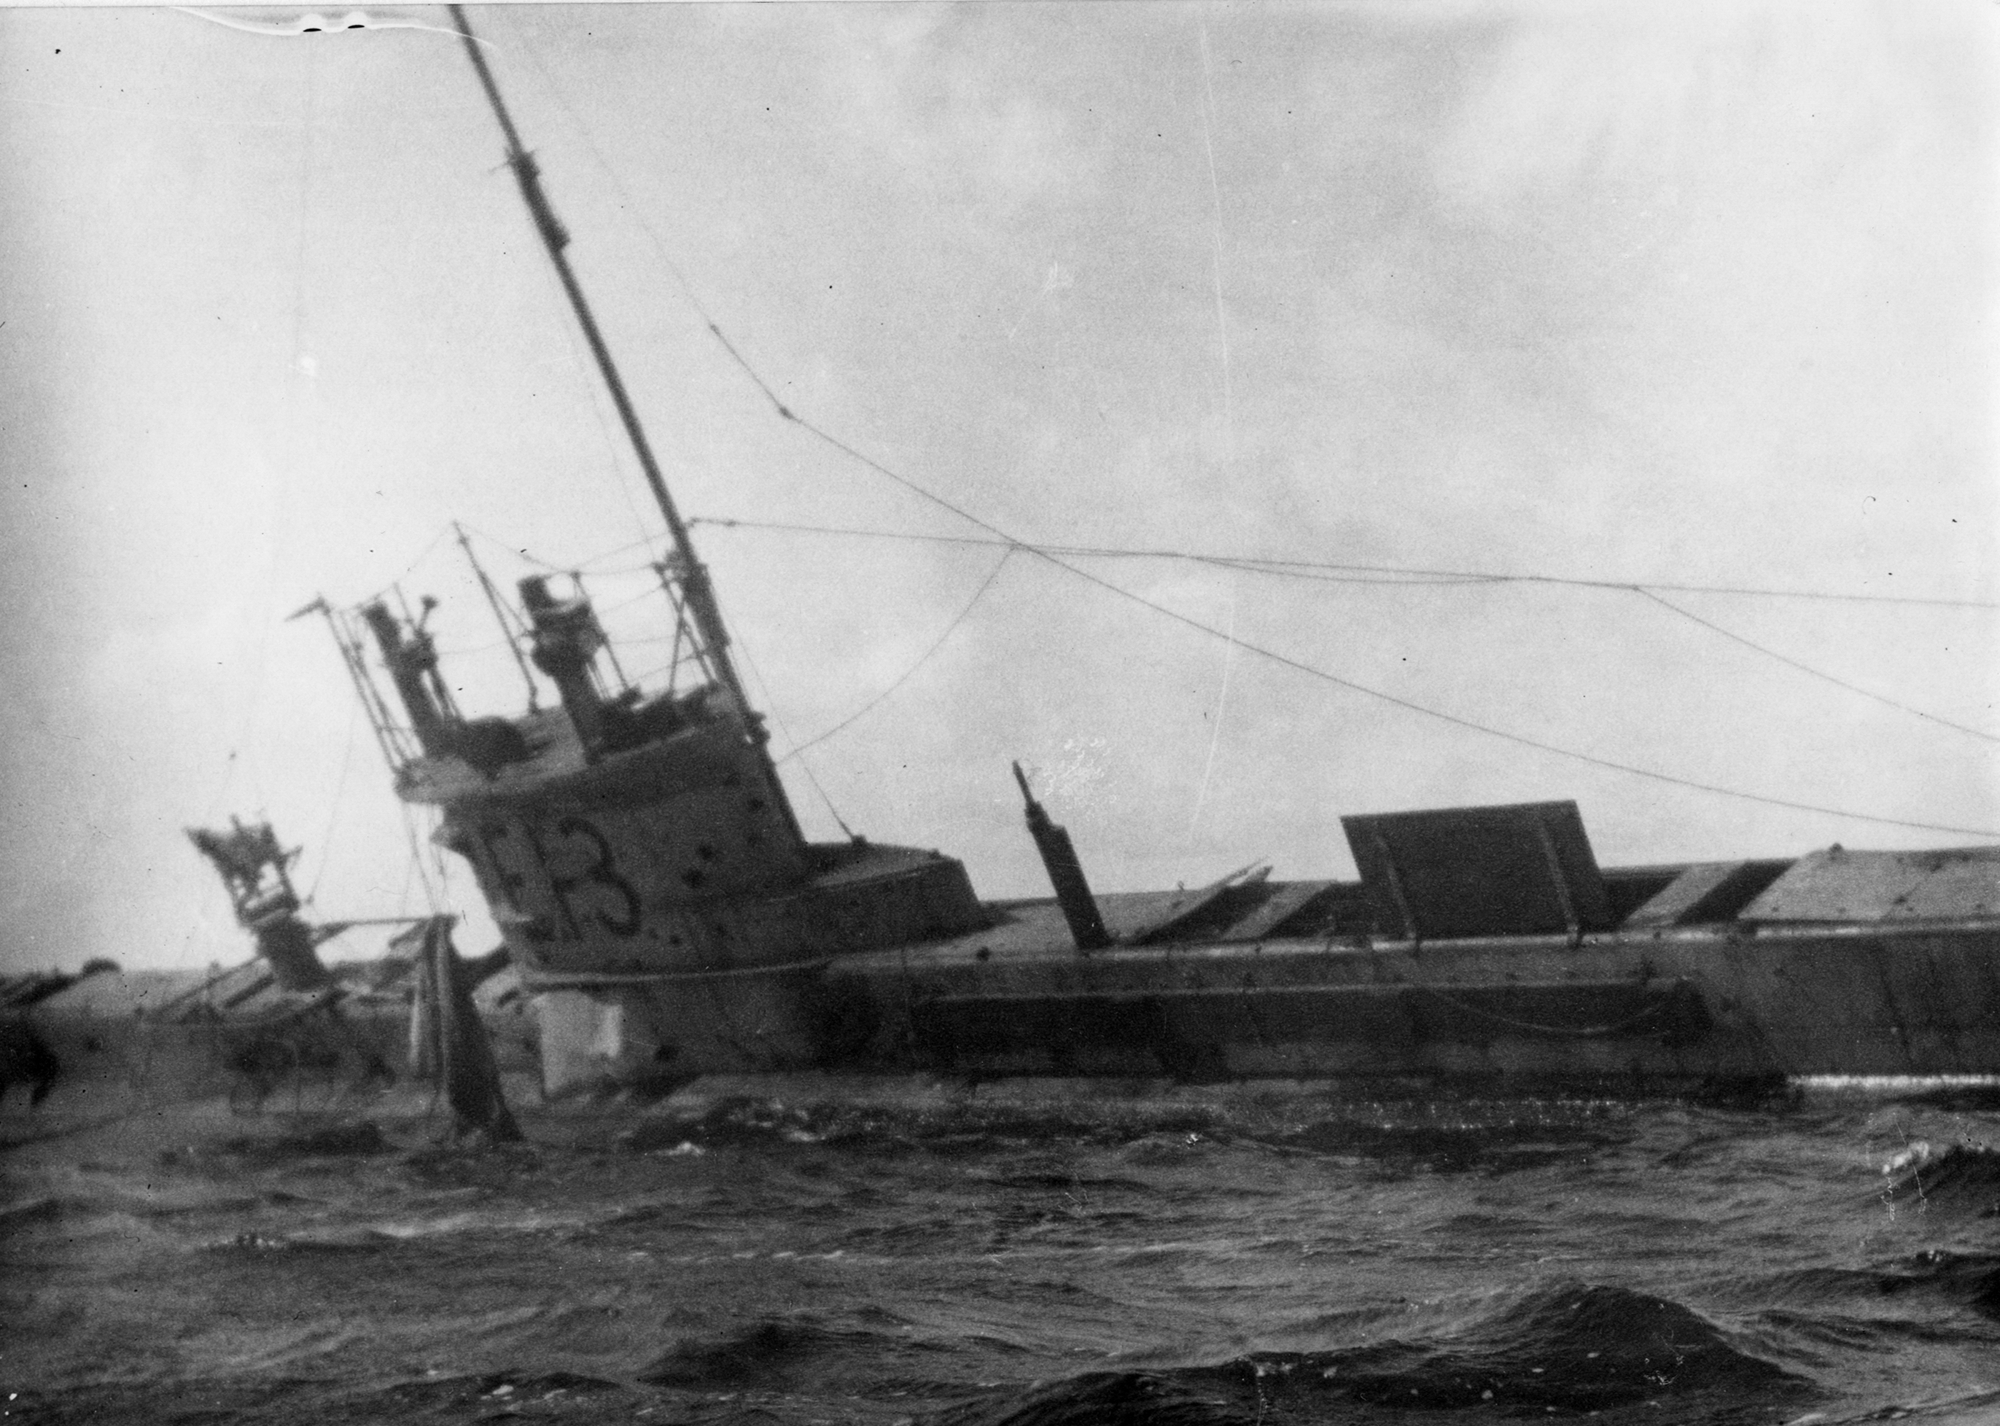 The British submarine E13 aground at Saltholm in the Øresund in 1915 after being attacked by German torpedo boats.